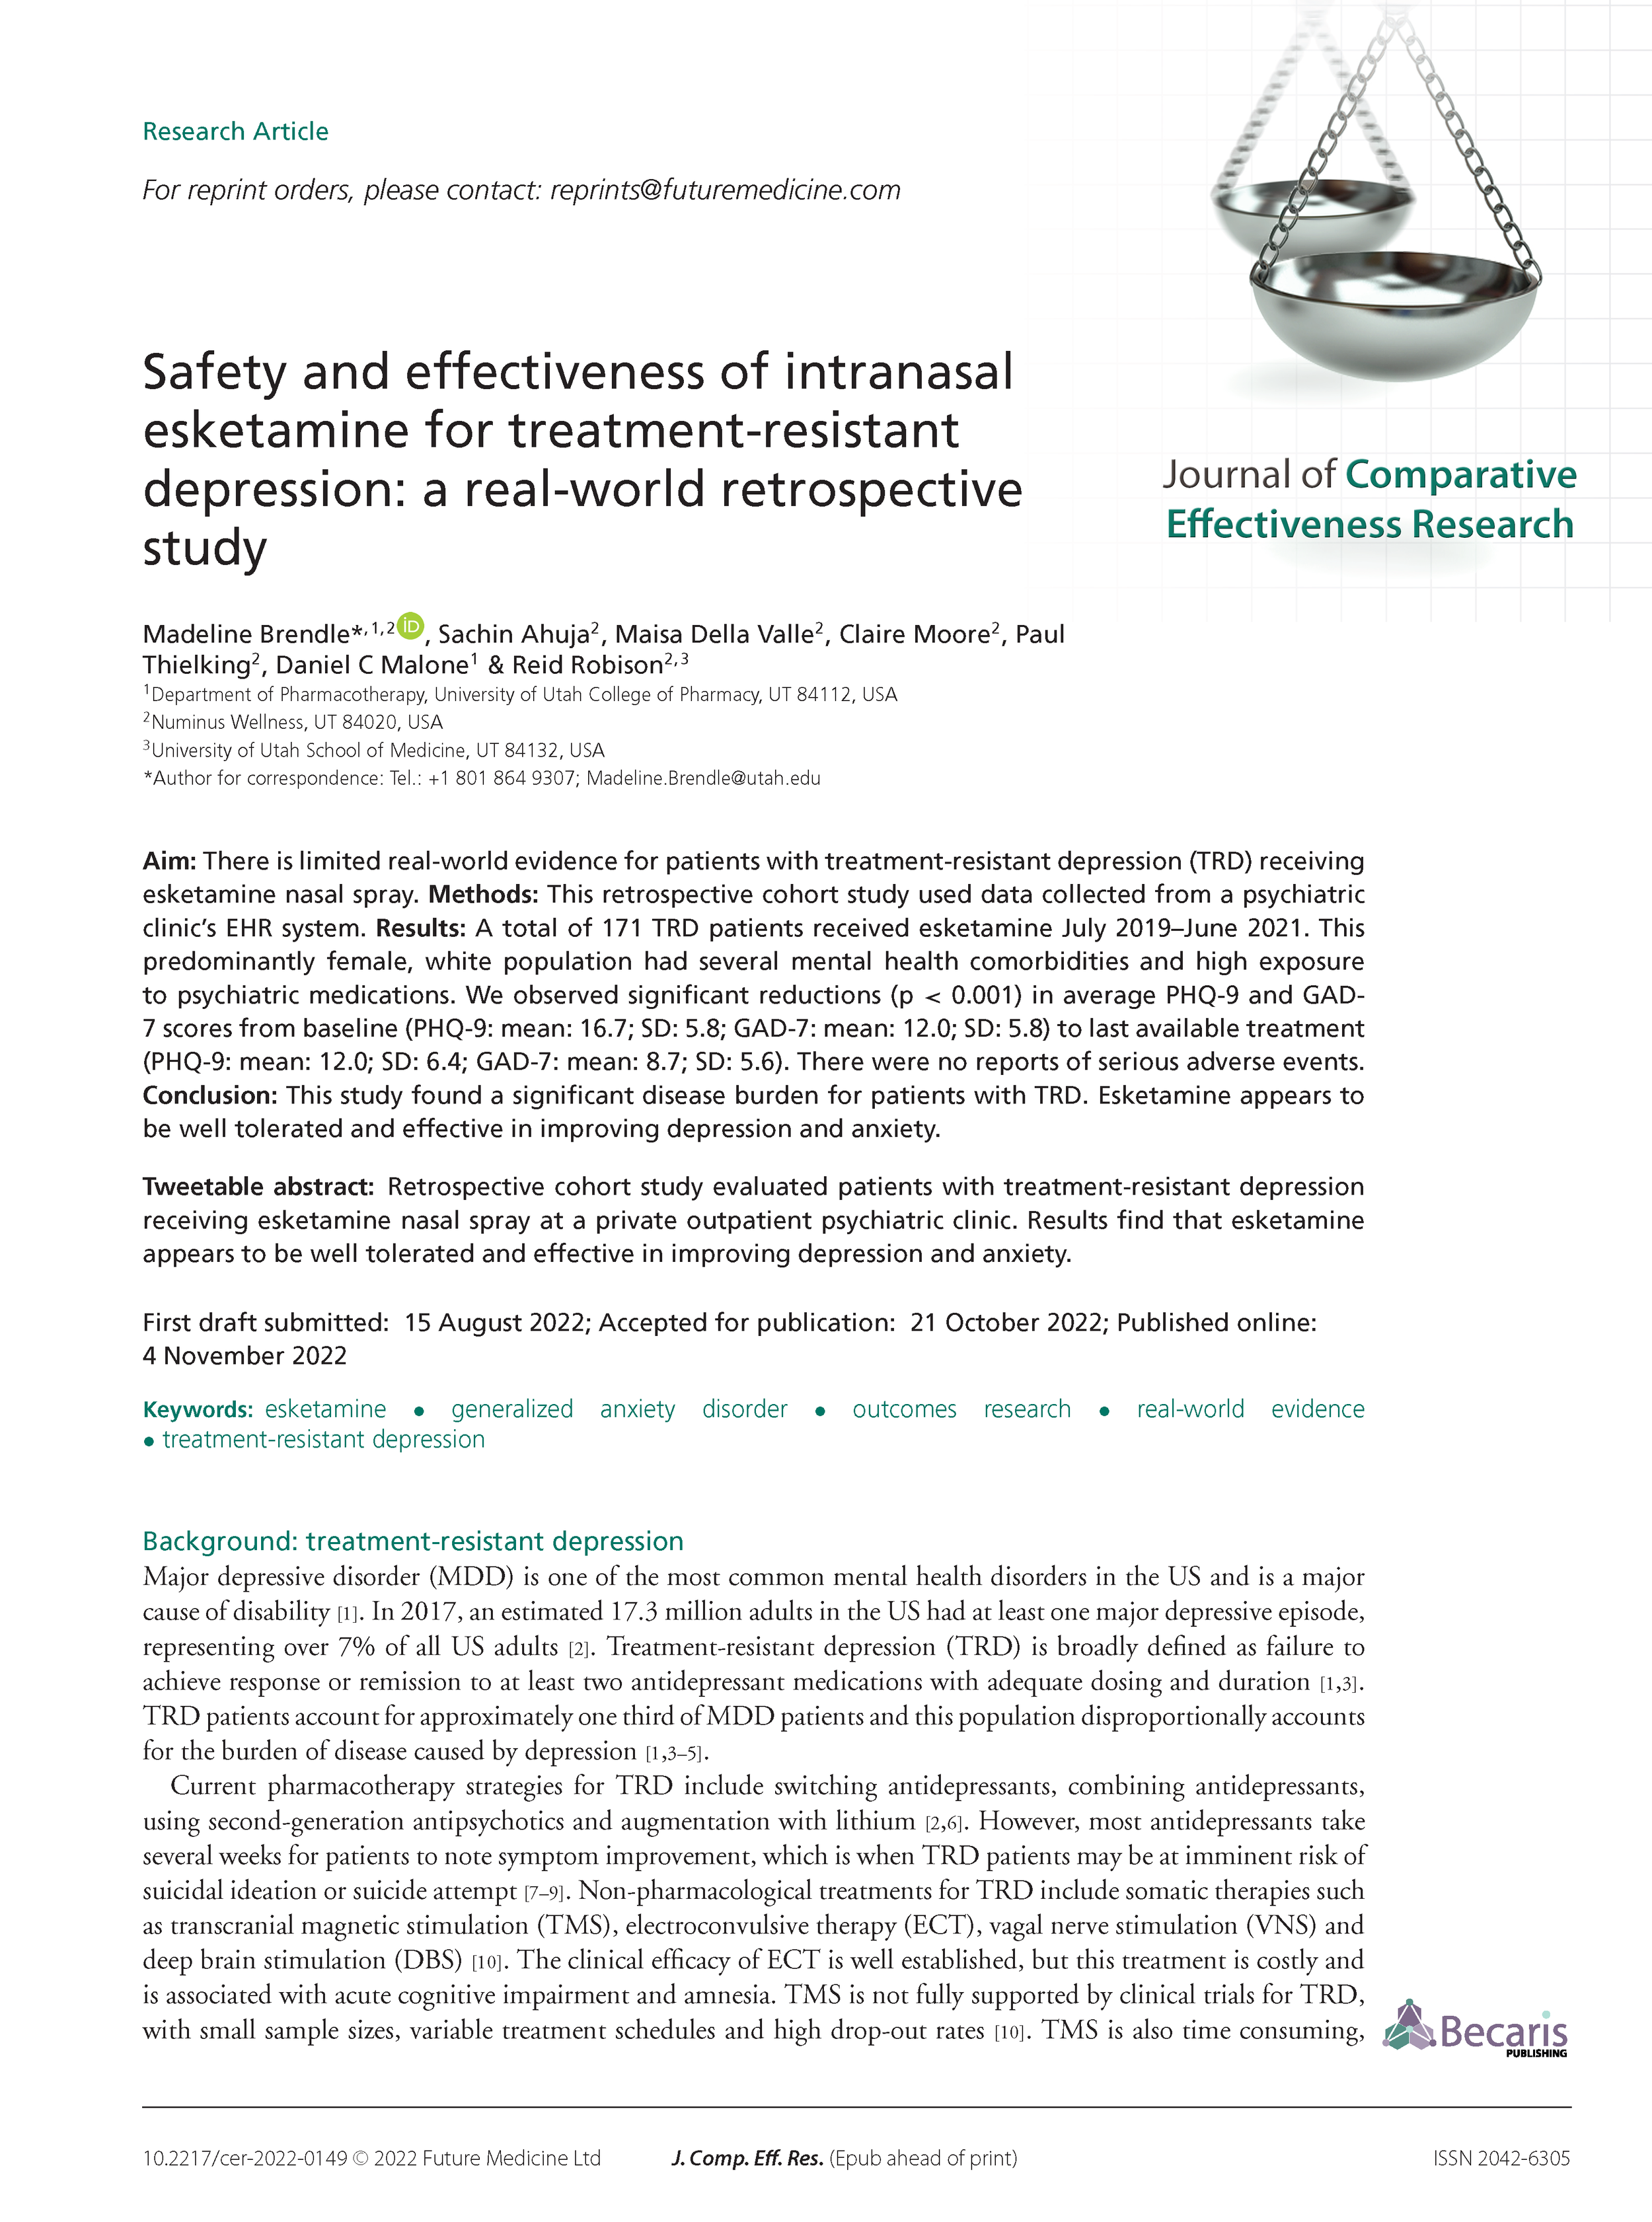 Safety and effectiveness of intranasal esketamine for TRD_a real-world retrospective study_Brendle 2022 (1)_Page_01.png